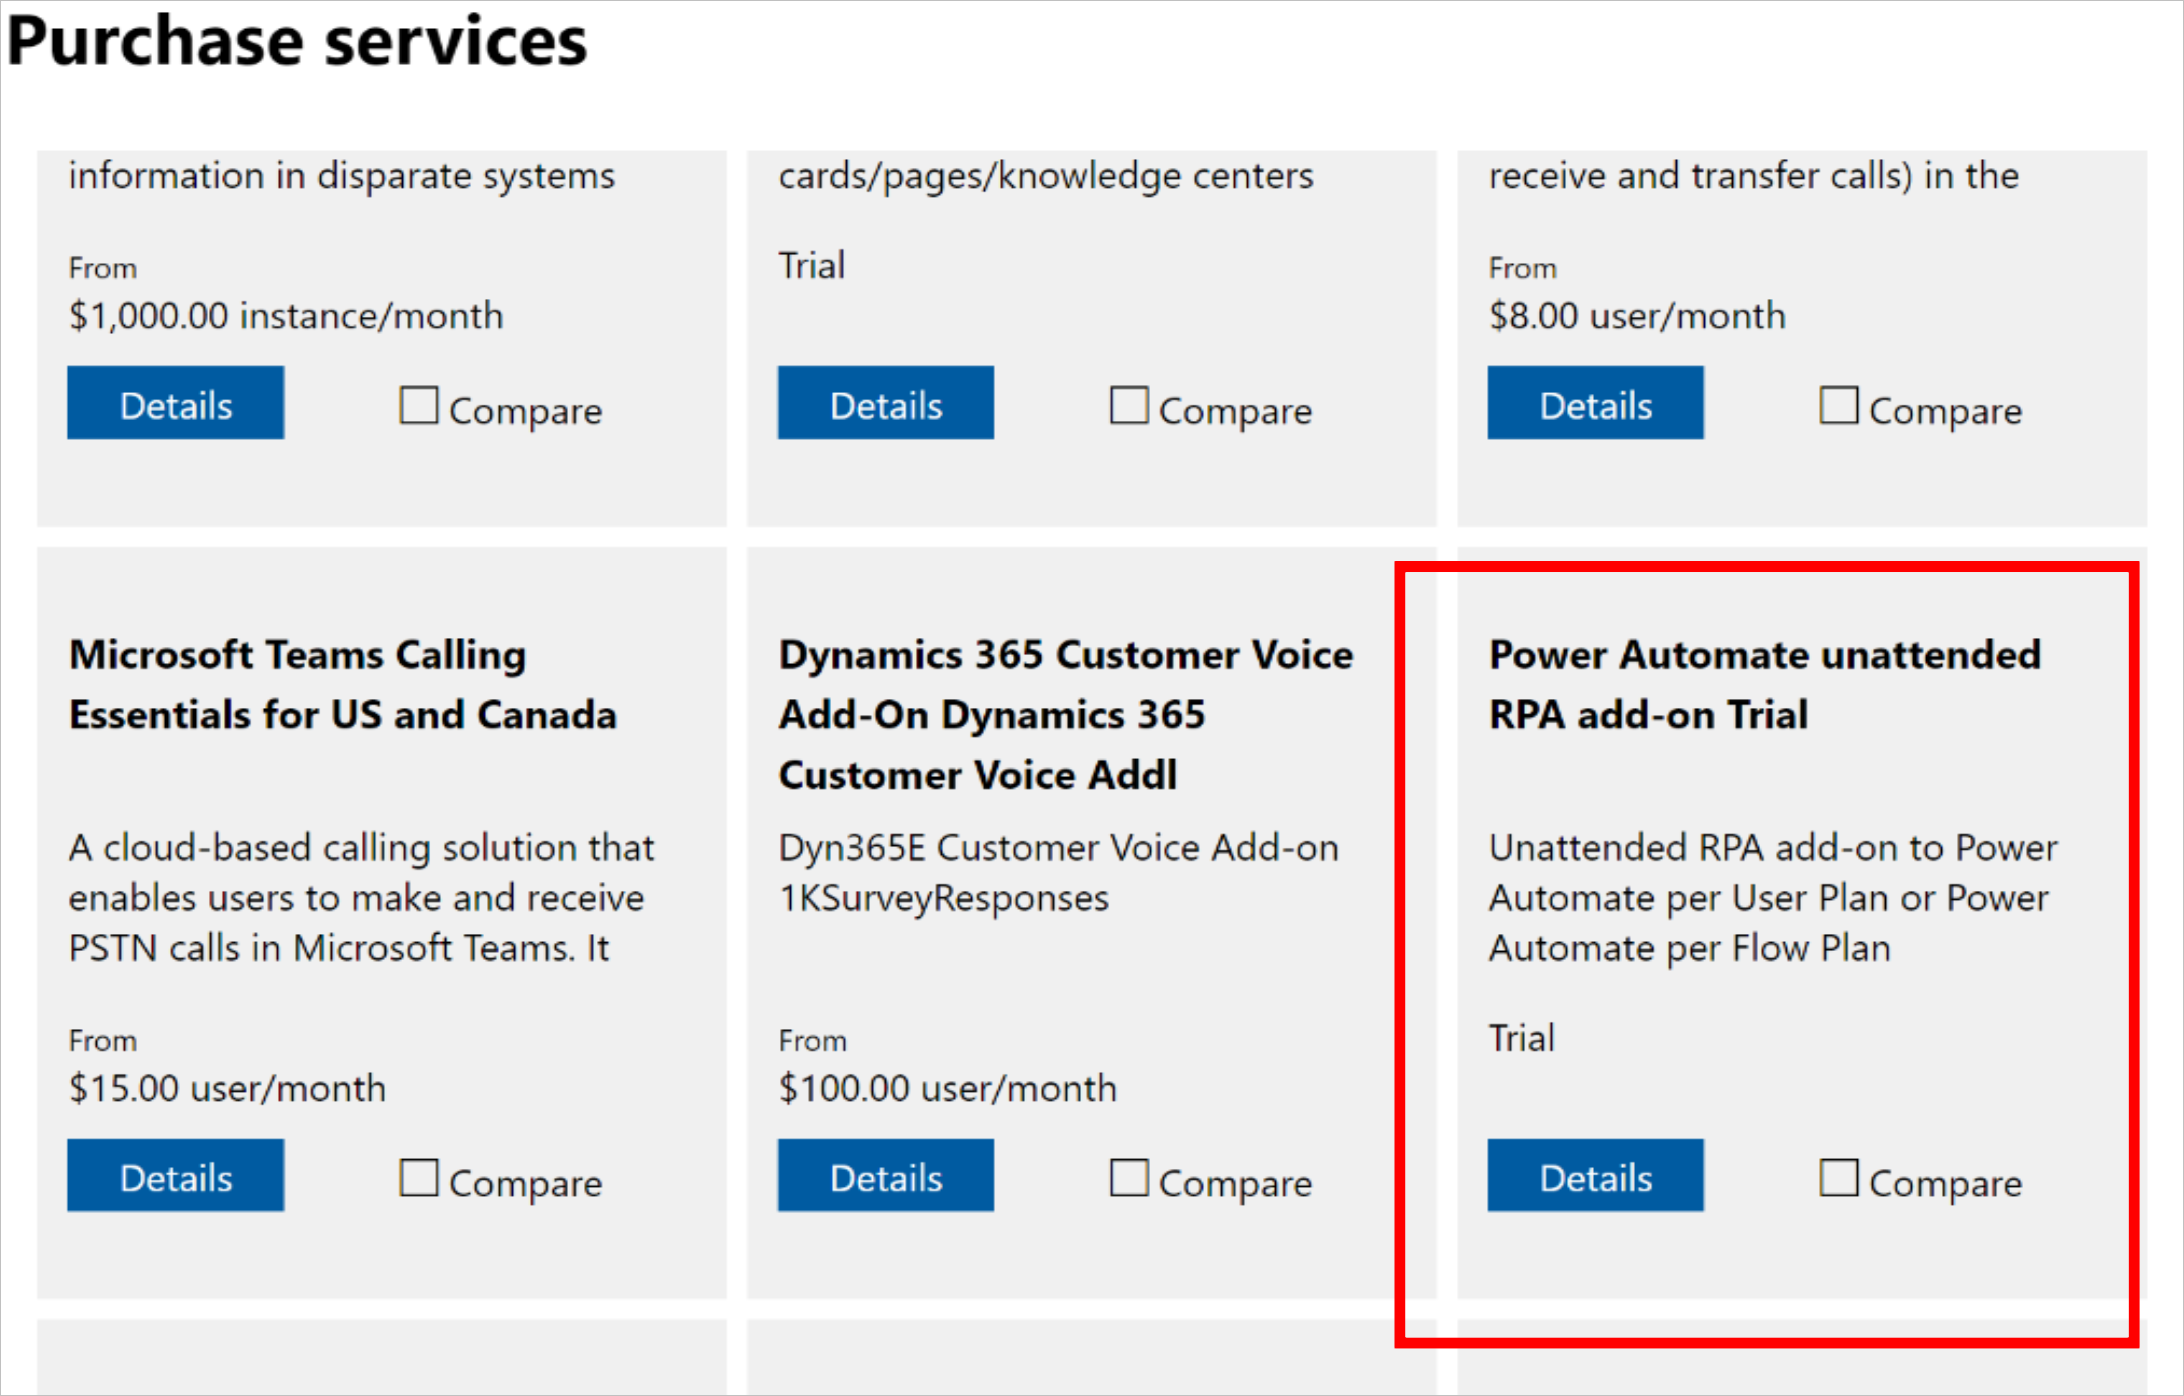 Is Power Automate free with Office 365?